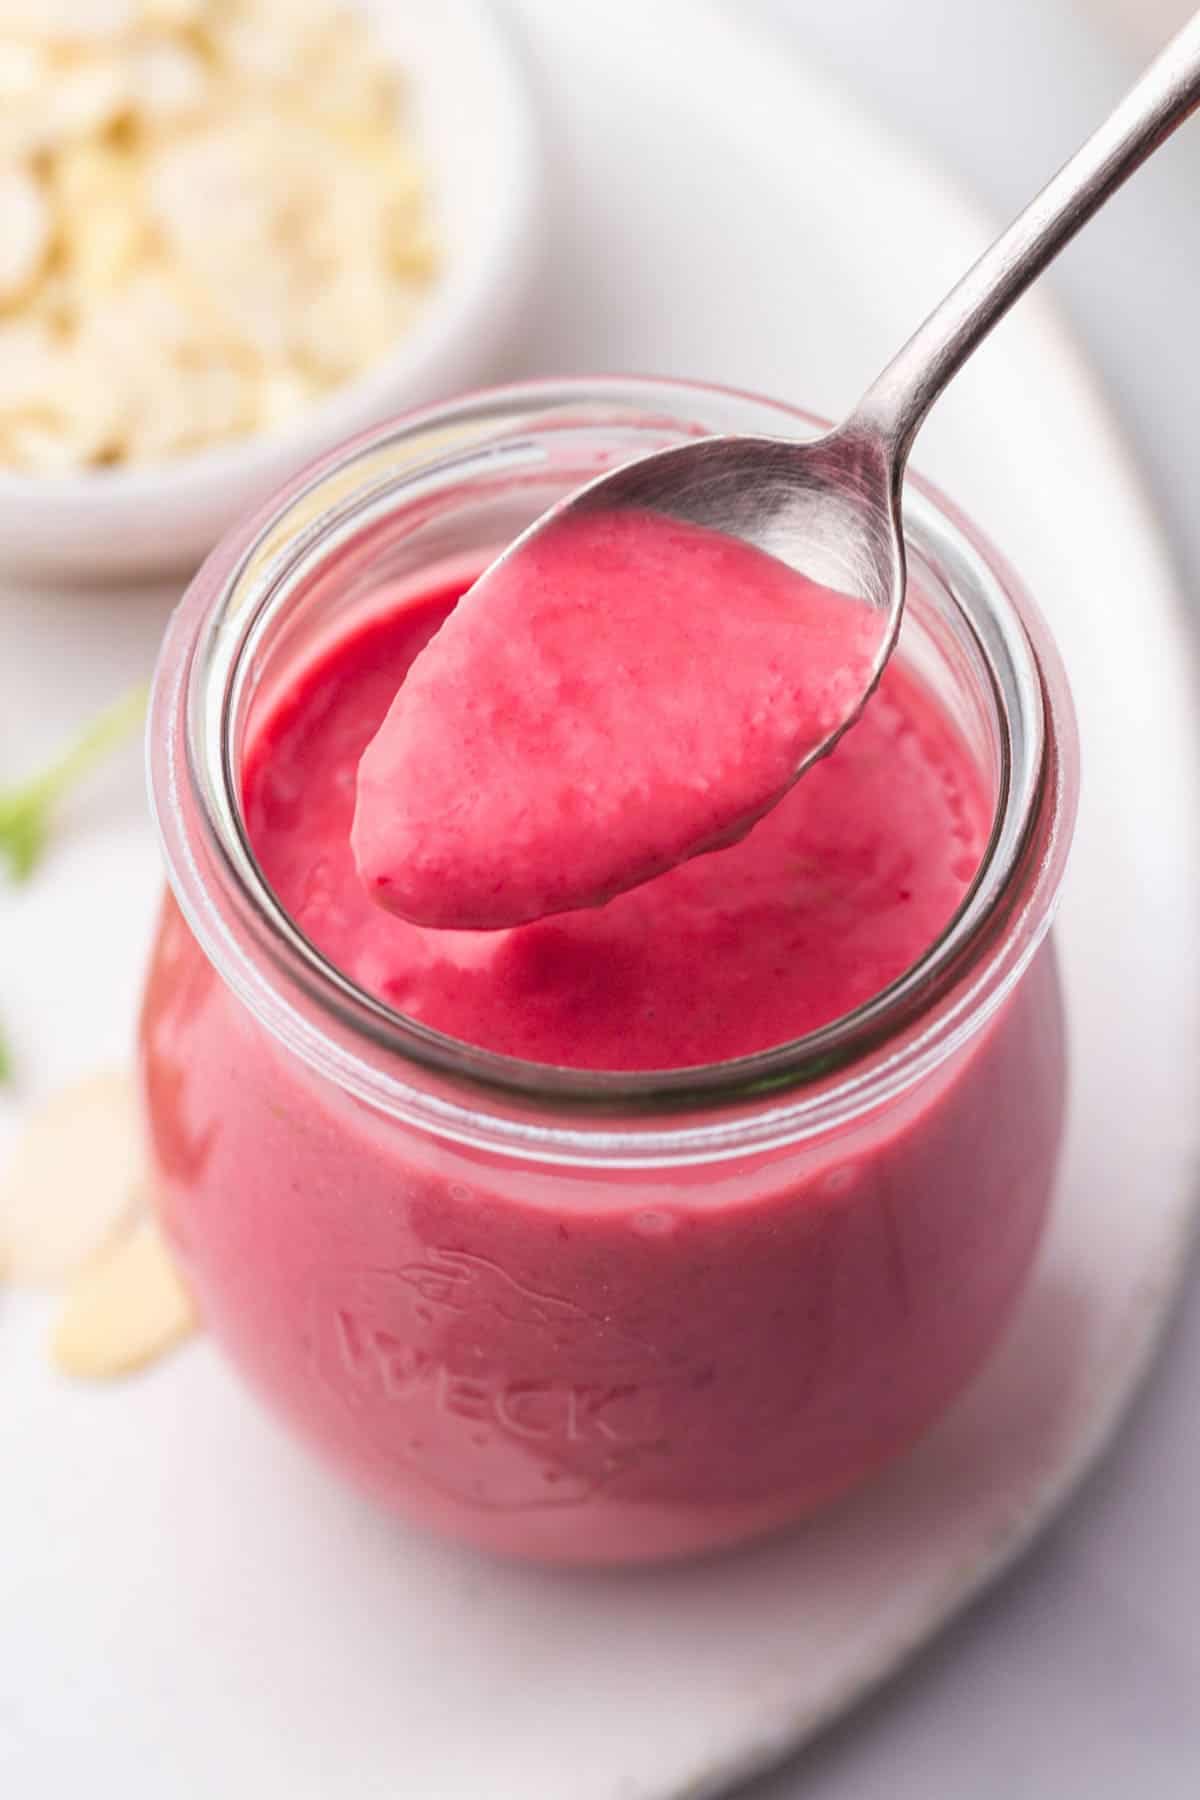 A small Weck jar filled with Raspberry Vinaigrette, and a teaspoon filled with the vinaigrette to show the texture